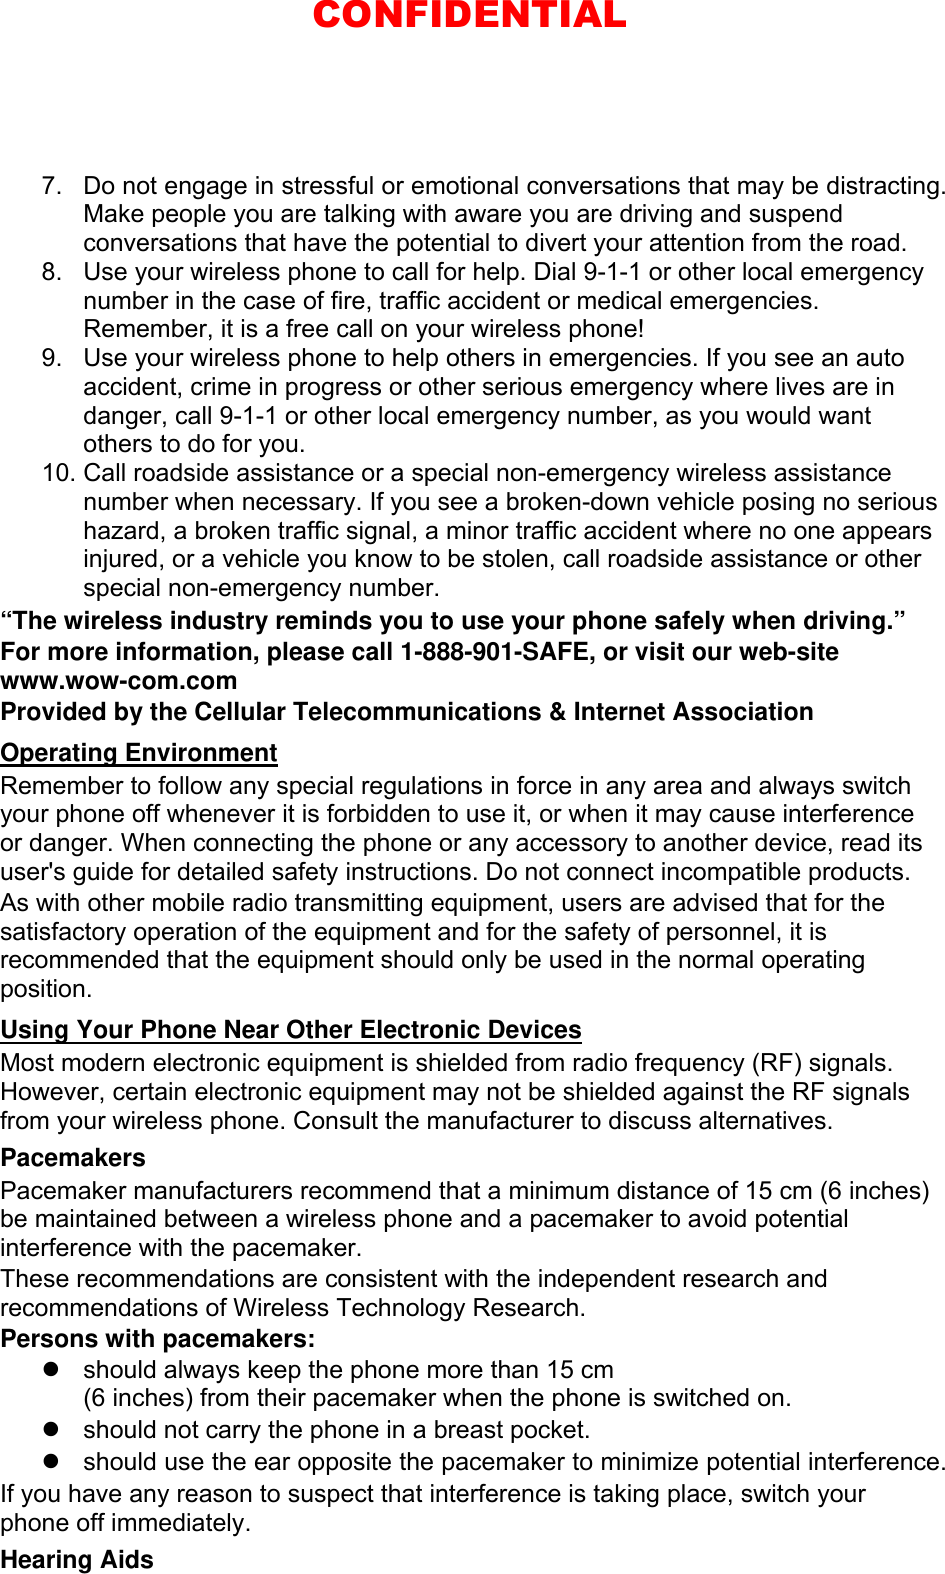 7.  Do not engage in stressful or emotional conversations that may be distracting. Make people you are talking with aware you are driving and suspend conversations that have the potential to divert your attention from the road. 8.  Use your wireless phone to call for help. Dial 9-1-1 or other local emergency number in the case of fire, traffic accident or medical emergencies. Remember, it is a free call on your wireless phone! 9.  Use your wireless phone to help others in emergencies. If you see an auto accident, crime in progress or other serious emergency where lives are in danger, call 9-1-1 or other local emergency number, as you would want others to do for you. 10. Call roadside assistance or a special non-emergency wireless assistance number when necessary. If you see a broken-down vehicle posing no serious hazard, a broken traffic signal, a minor traffic accident where no one appears injured, or a vehicle you know to be stolen, call roadside assistance or other special non-emergency number. “The wireless industry reminds you to use your phone safely when driving.” For more information, please call 1-888-901-SAFE, or visit our web-site www.wow-com.com Provided by the Cellular Telecommunications &amp; Internet Association Operating Environment Remember to follow any special regulations in force in any area and always switch your phone off whenever it is forbidden to use it, or when it may cause interference or danger. When connecting the phone or any accessory to another device, read its user&apos;s guide for detailed safety instructions. Do not connect incompatible products. As with other mobile radio transmitting equipment, users are advised that for the satisfactory operation of the equipment and for the safety of personnel, it is recommended that the equipment should only be used in the normal operating position. Using Your Phone Near Other Electronic Devices Most modern electronic equipment is shielded from radio frequency (RF) signals. However, certain electronic equipment may not be shielded against the RF signals from your wireless phone. Consult the manufacturer to discuss alternatives. Pacemakers Pacemaker manufacturers recommend that a minimum distance of 15 cm (6 inches) be maintained between a wireless phone and a pacemaker to avoid potential interference with the pacemaker. These recommendations are consistent with the independent research and recommendations of Wireless Technology Research. Persons with pacemakers:   should always keep the phone more than 15 cm   (6 inches) from their pacemaker when the phone is switched on.   should not carry the phone in a breast pocket.   should use the ear opposite the pacemaker to minimize potential interference. If you have any reason to suspect that interference is taking place, switch your phone off immediately. Hearing Aids CONFIDENTIAL